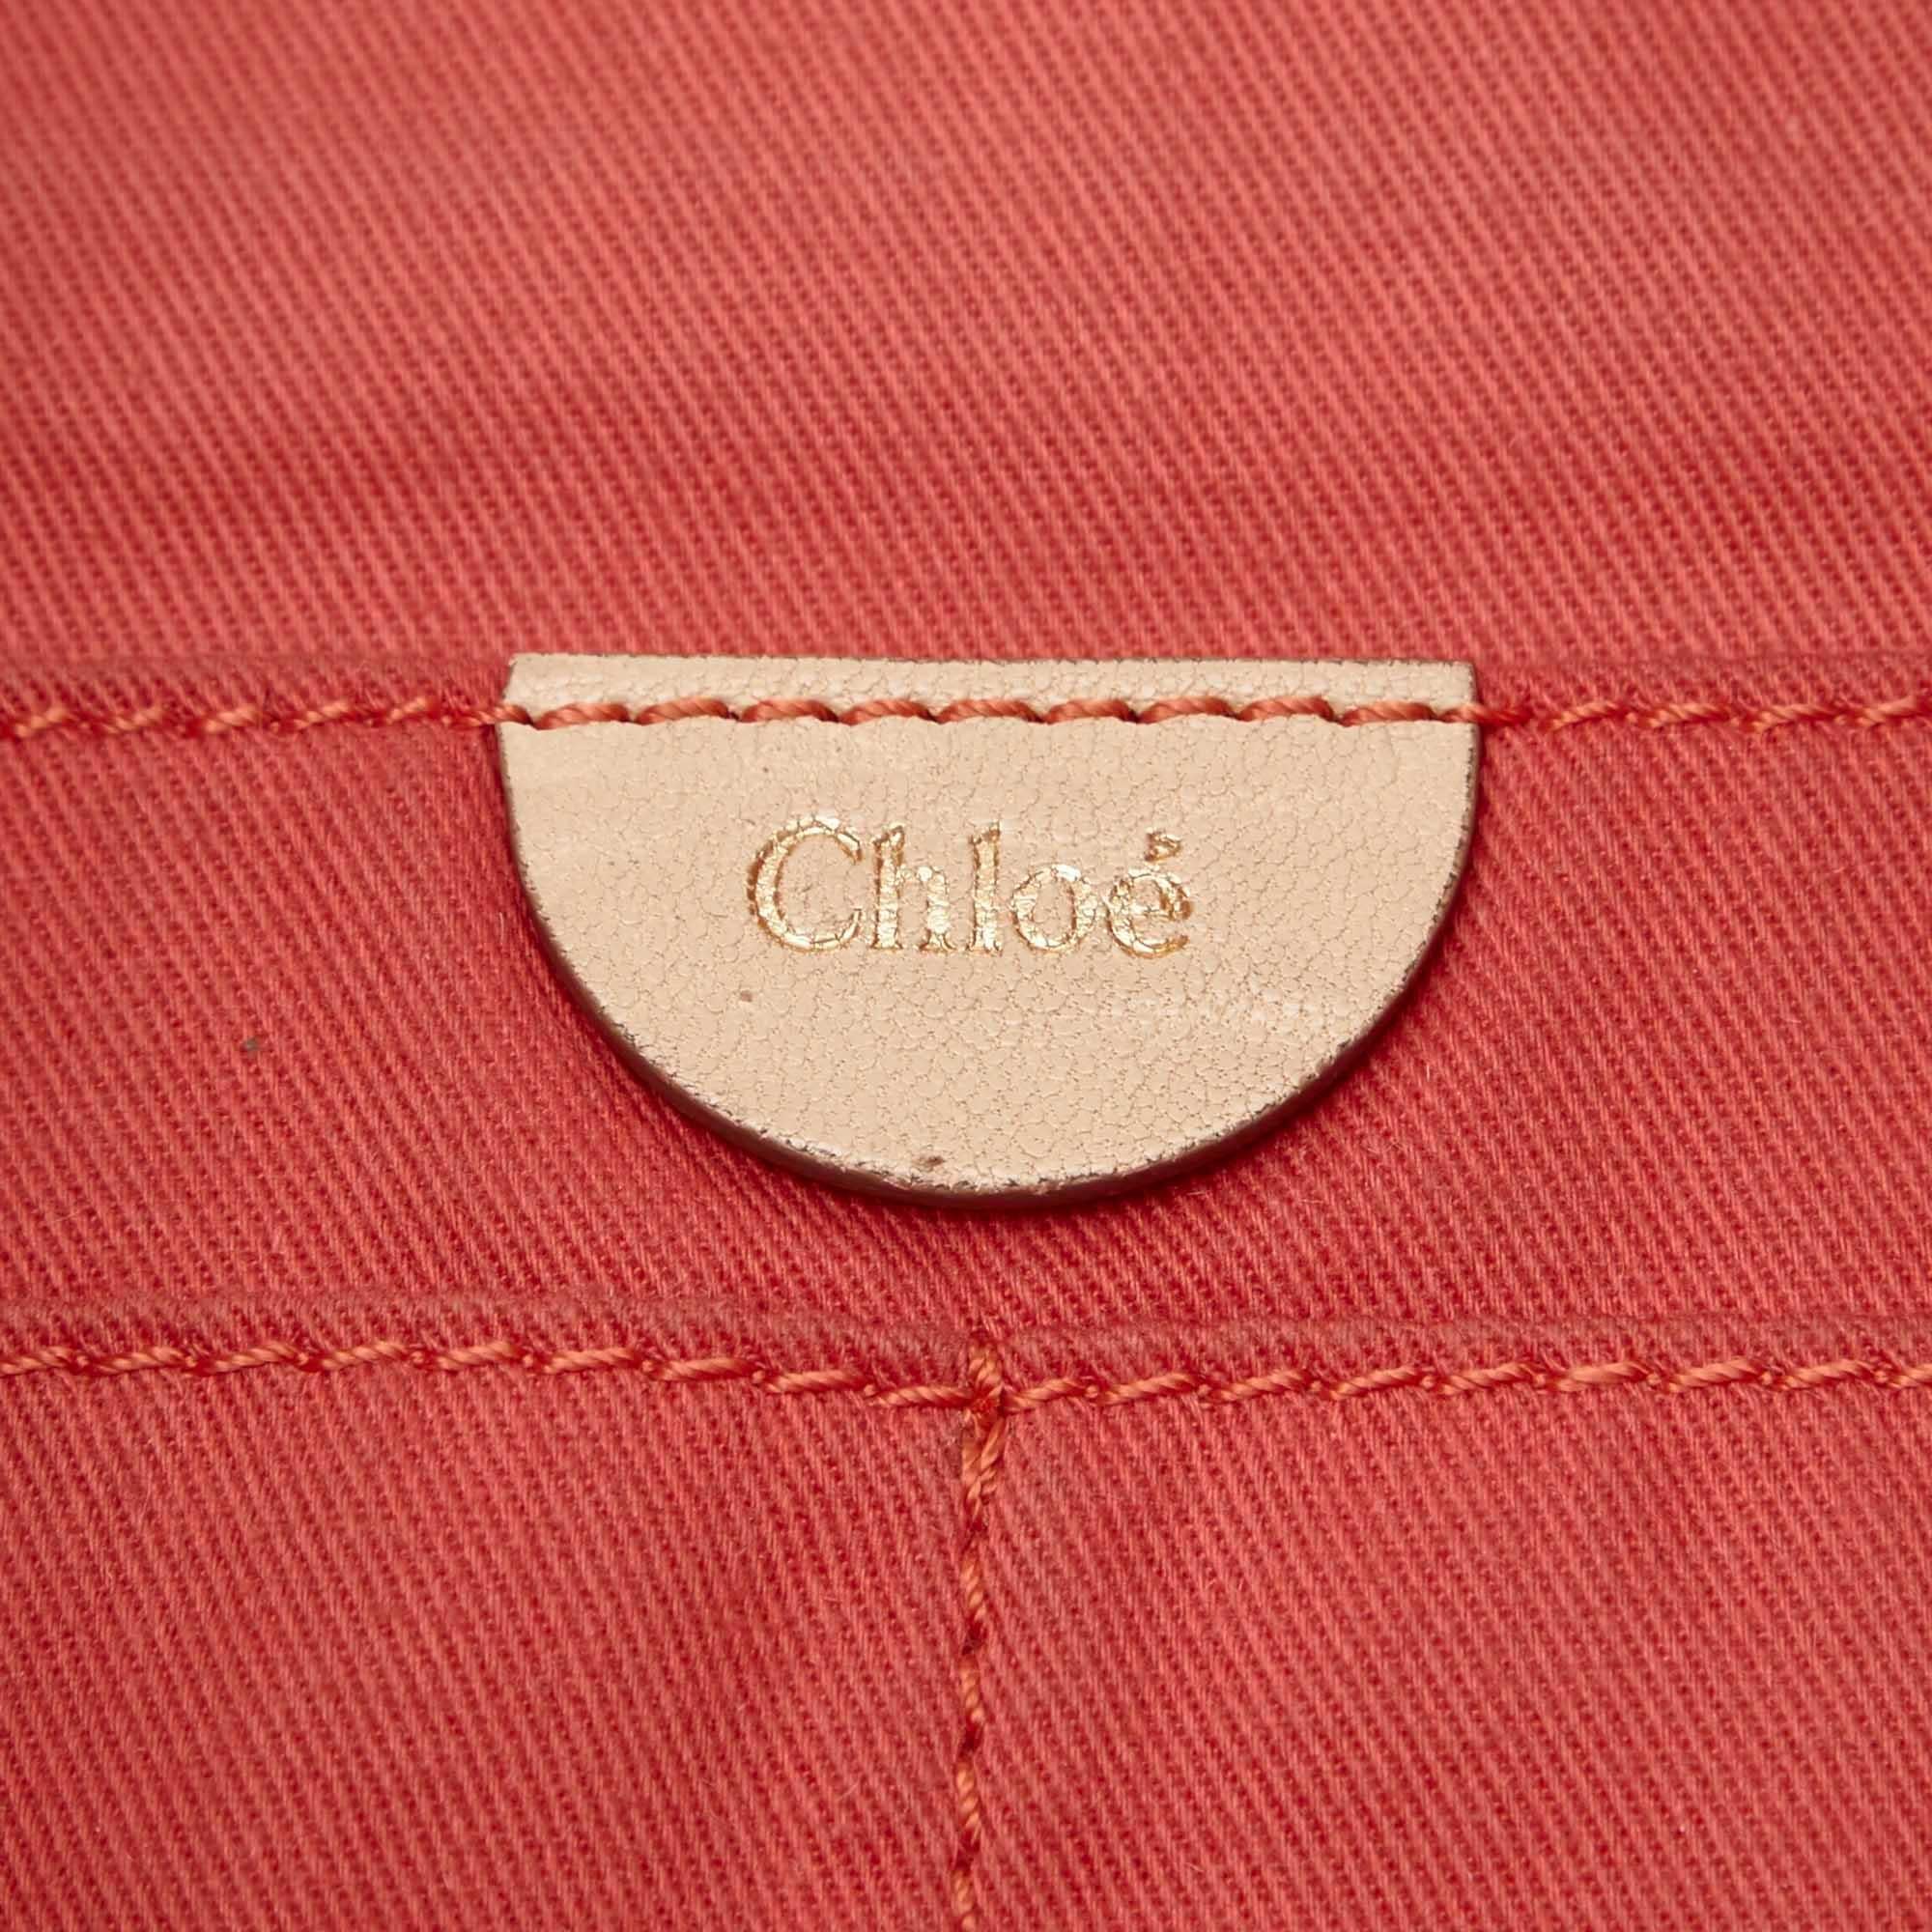 Vintage Authentic Chloe Leather Clutch w Dust Bag Authenticity Card SMALL  For Sale 1